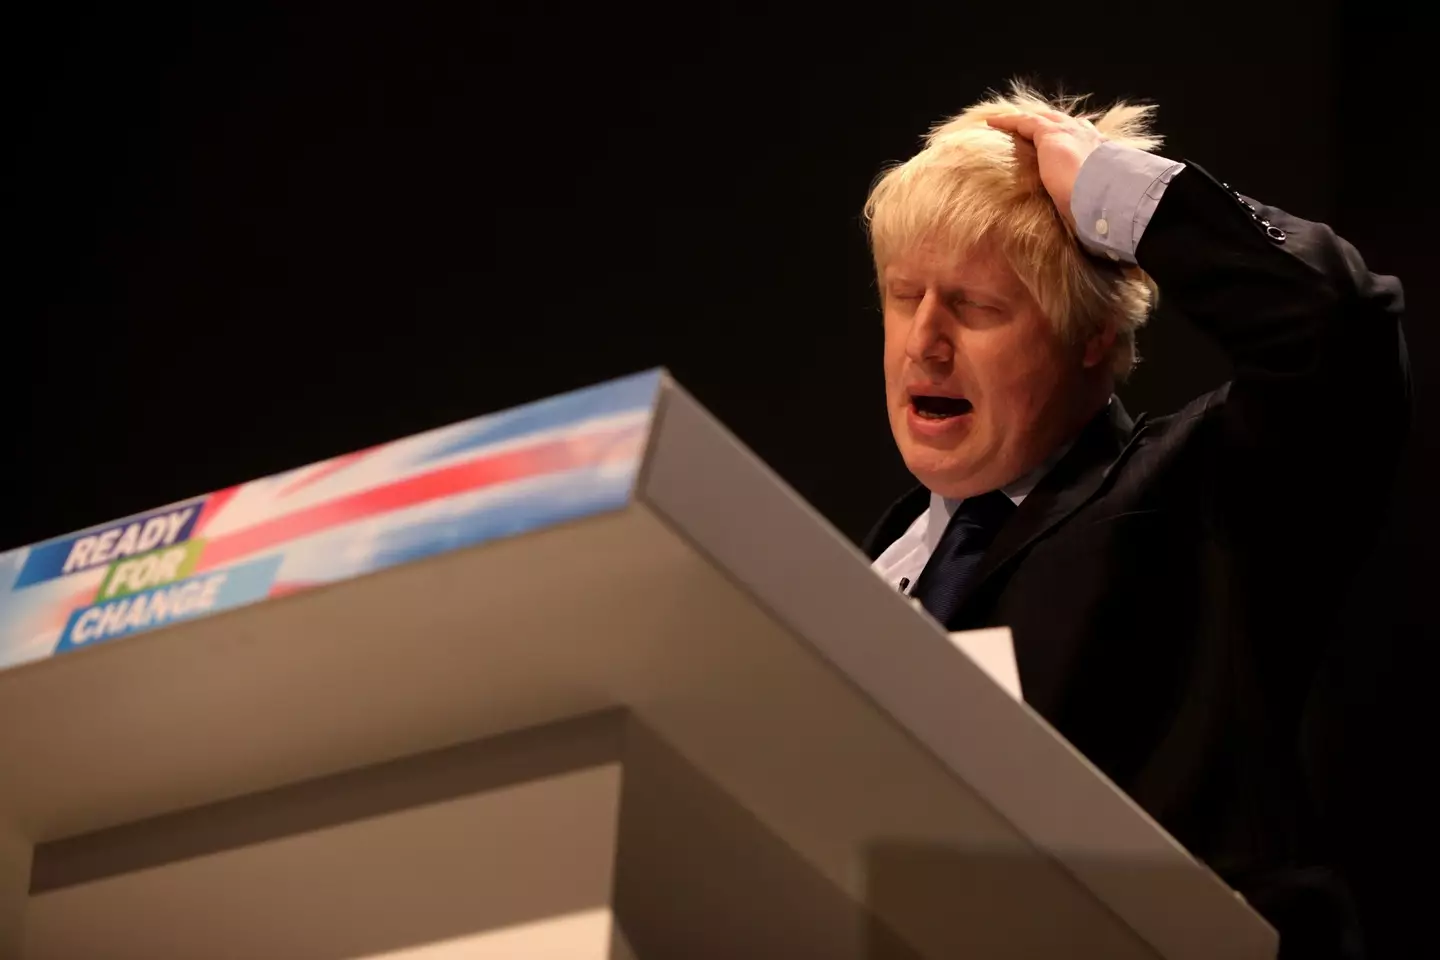 Boris Johnson pulled out of the Conservative leadership race yesterday.